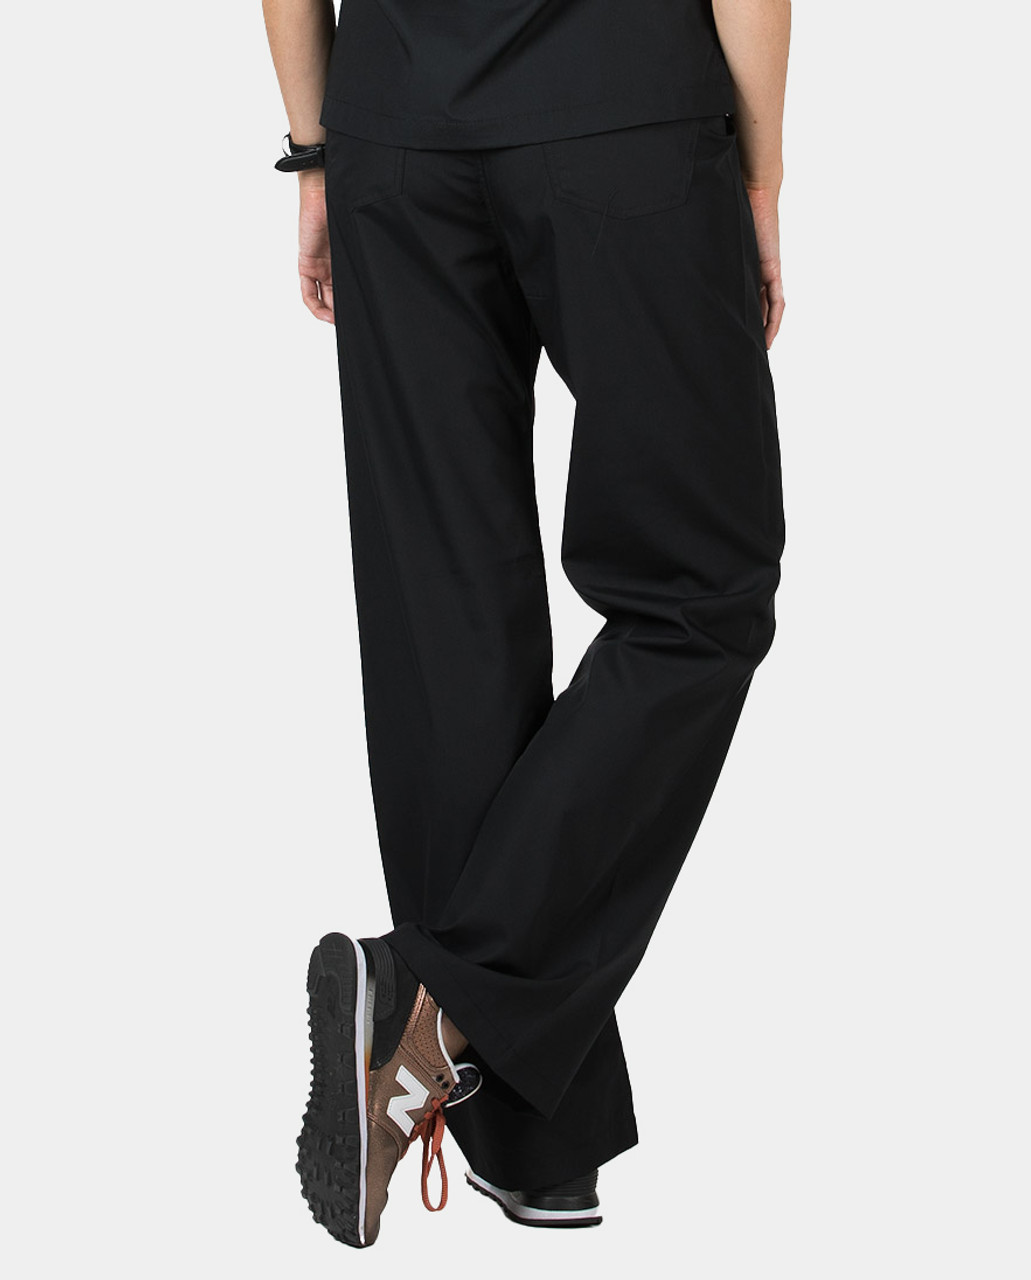 Tall Classic Simple Scrub Pants for Women